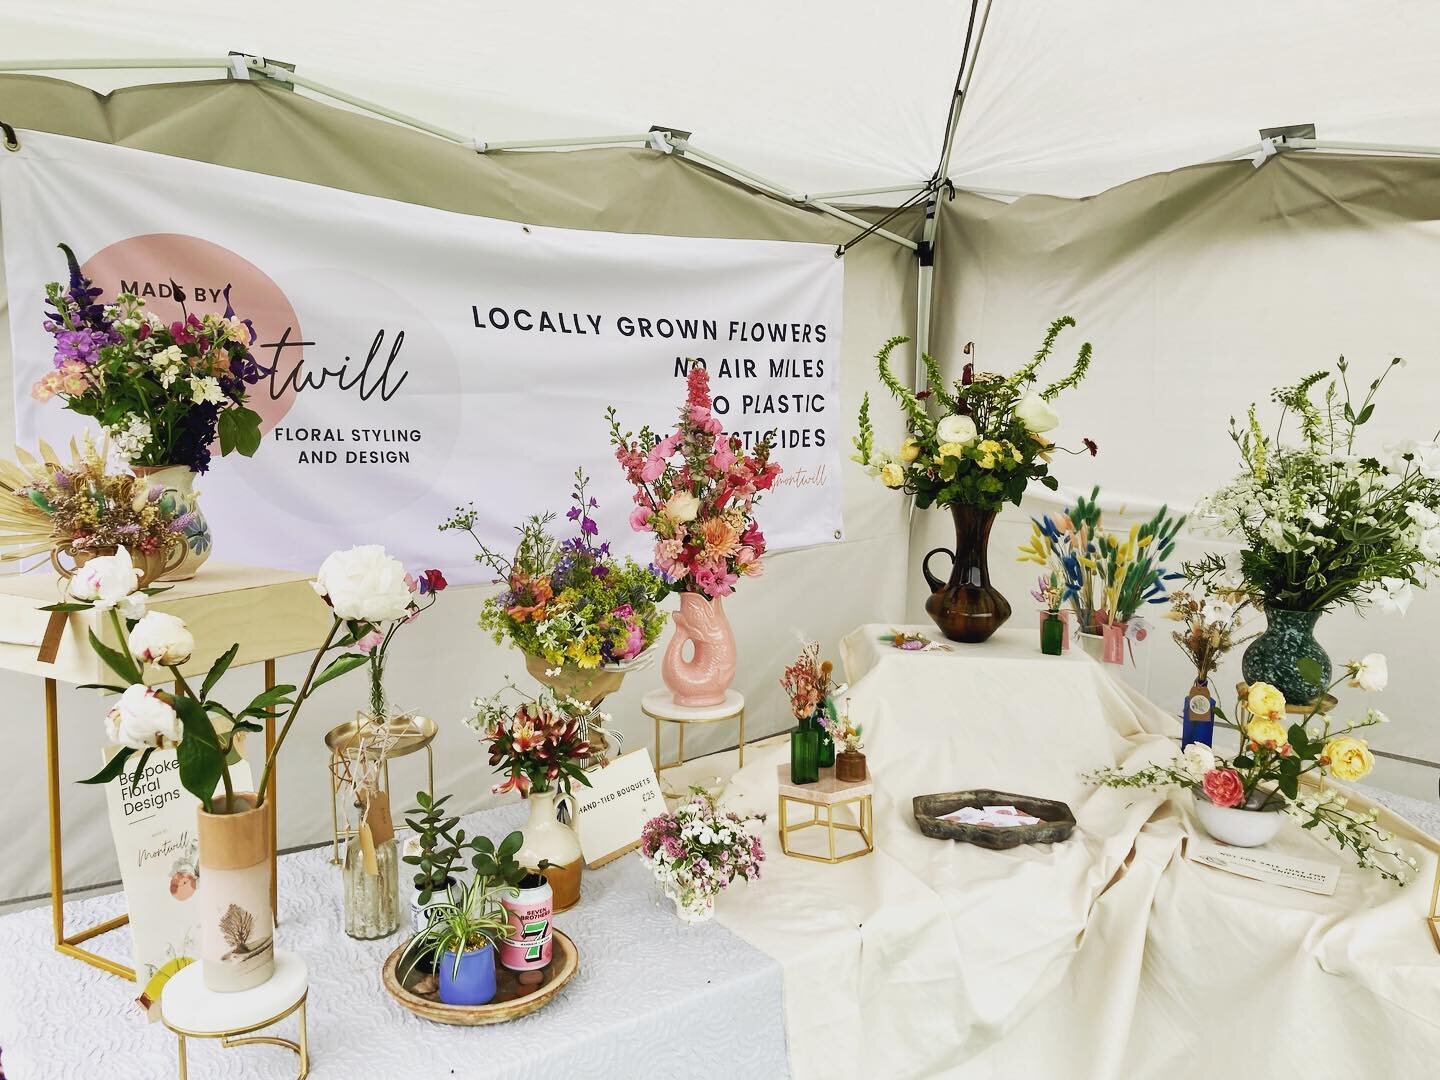 What a day at the Wheathampstead Summer market yesterday created by @villagepopup. 🤩 This was my first market experience and the community of local sellers is fantastic and I had such fun presenting my creations and meeting people while adding flora